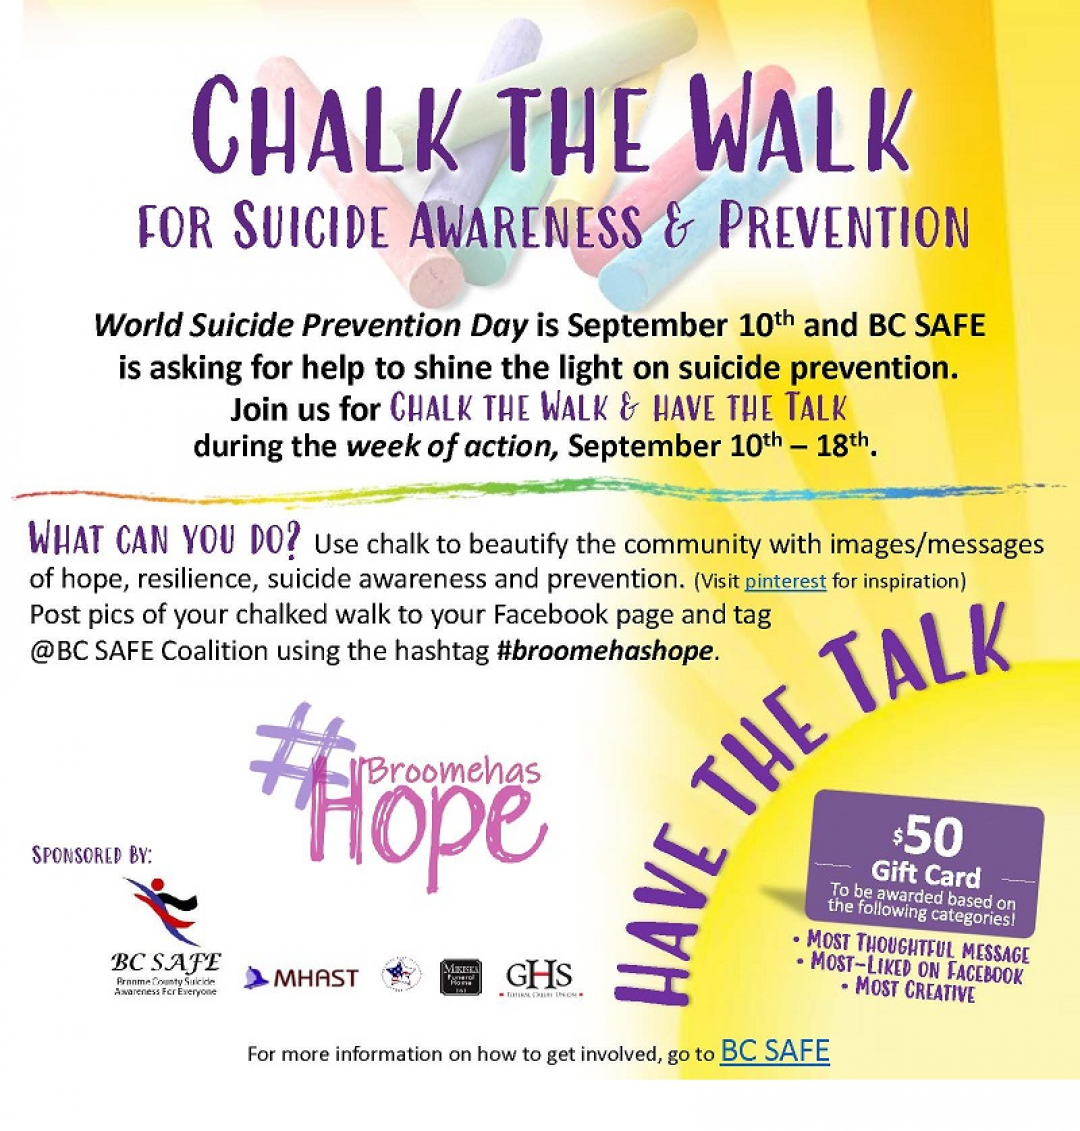 Chalk the Walk Suicide Awareness Event The Buzz